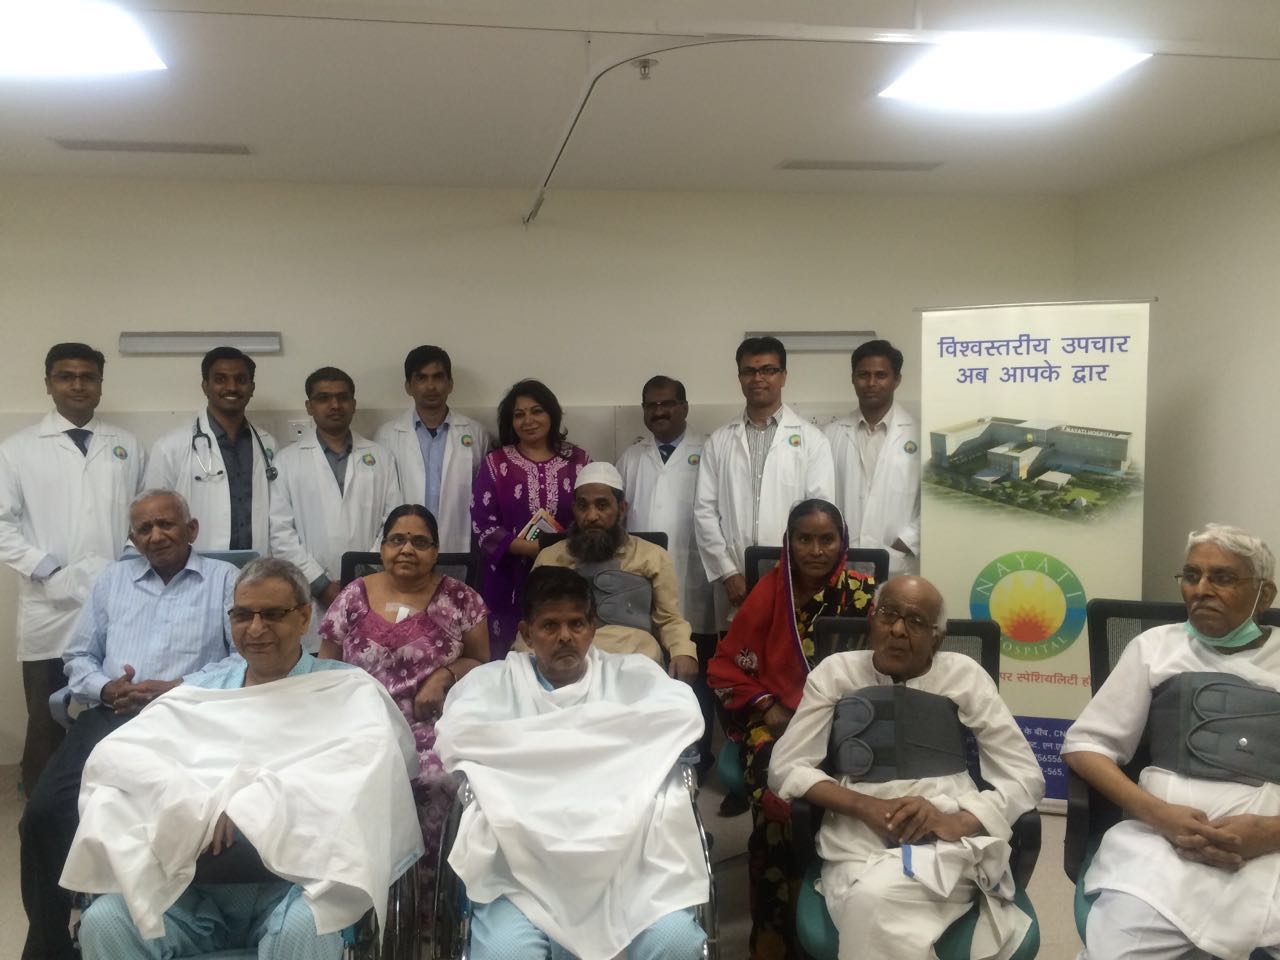 Nayati team celebrates World Hypertension Day along with their cardiac patients